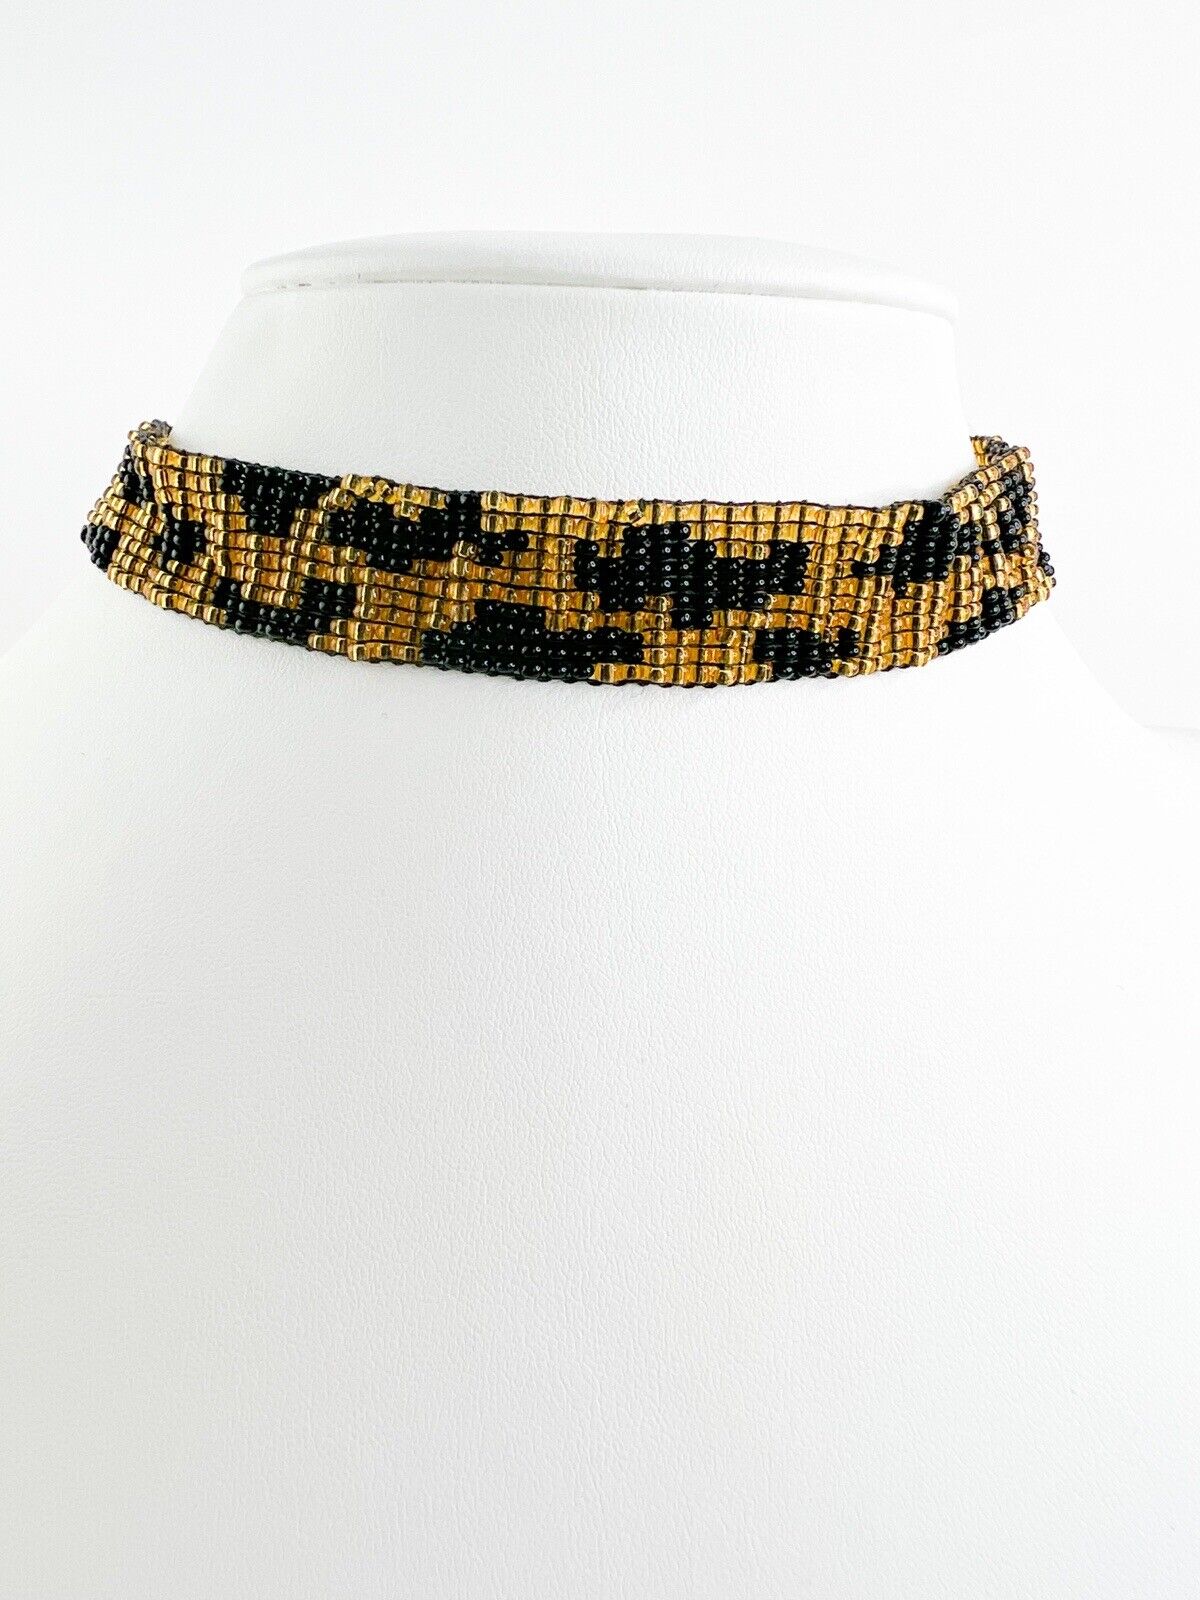 Vintage Christian Dior choker Necklace, Animal Leopard Necklace, Dior Necklace John Galliano, Gold Tone Necklace, Glass beads Necklace